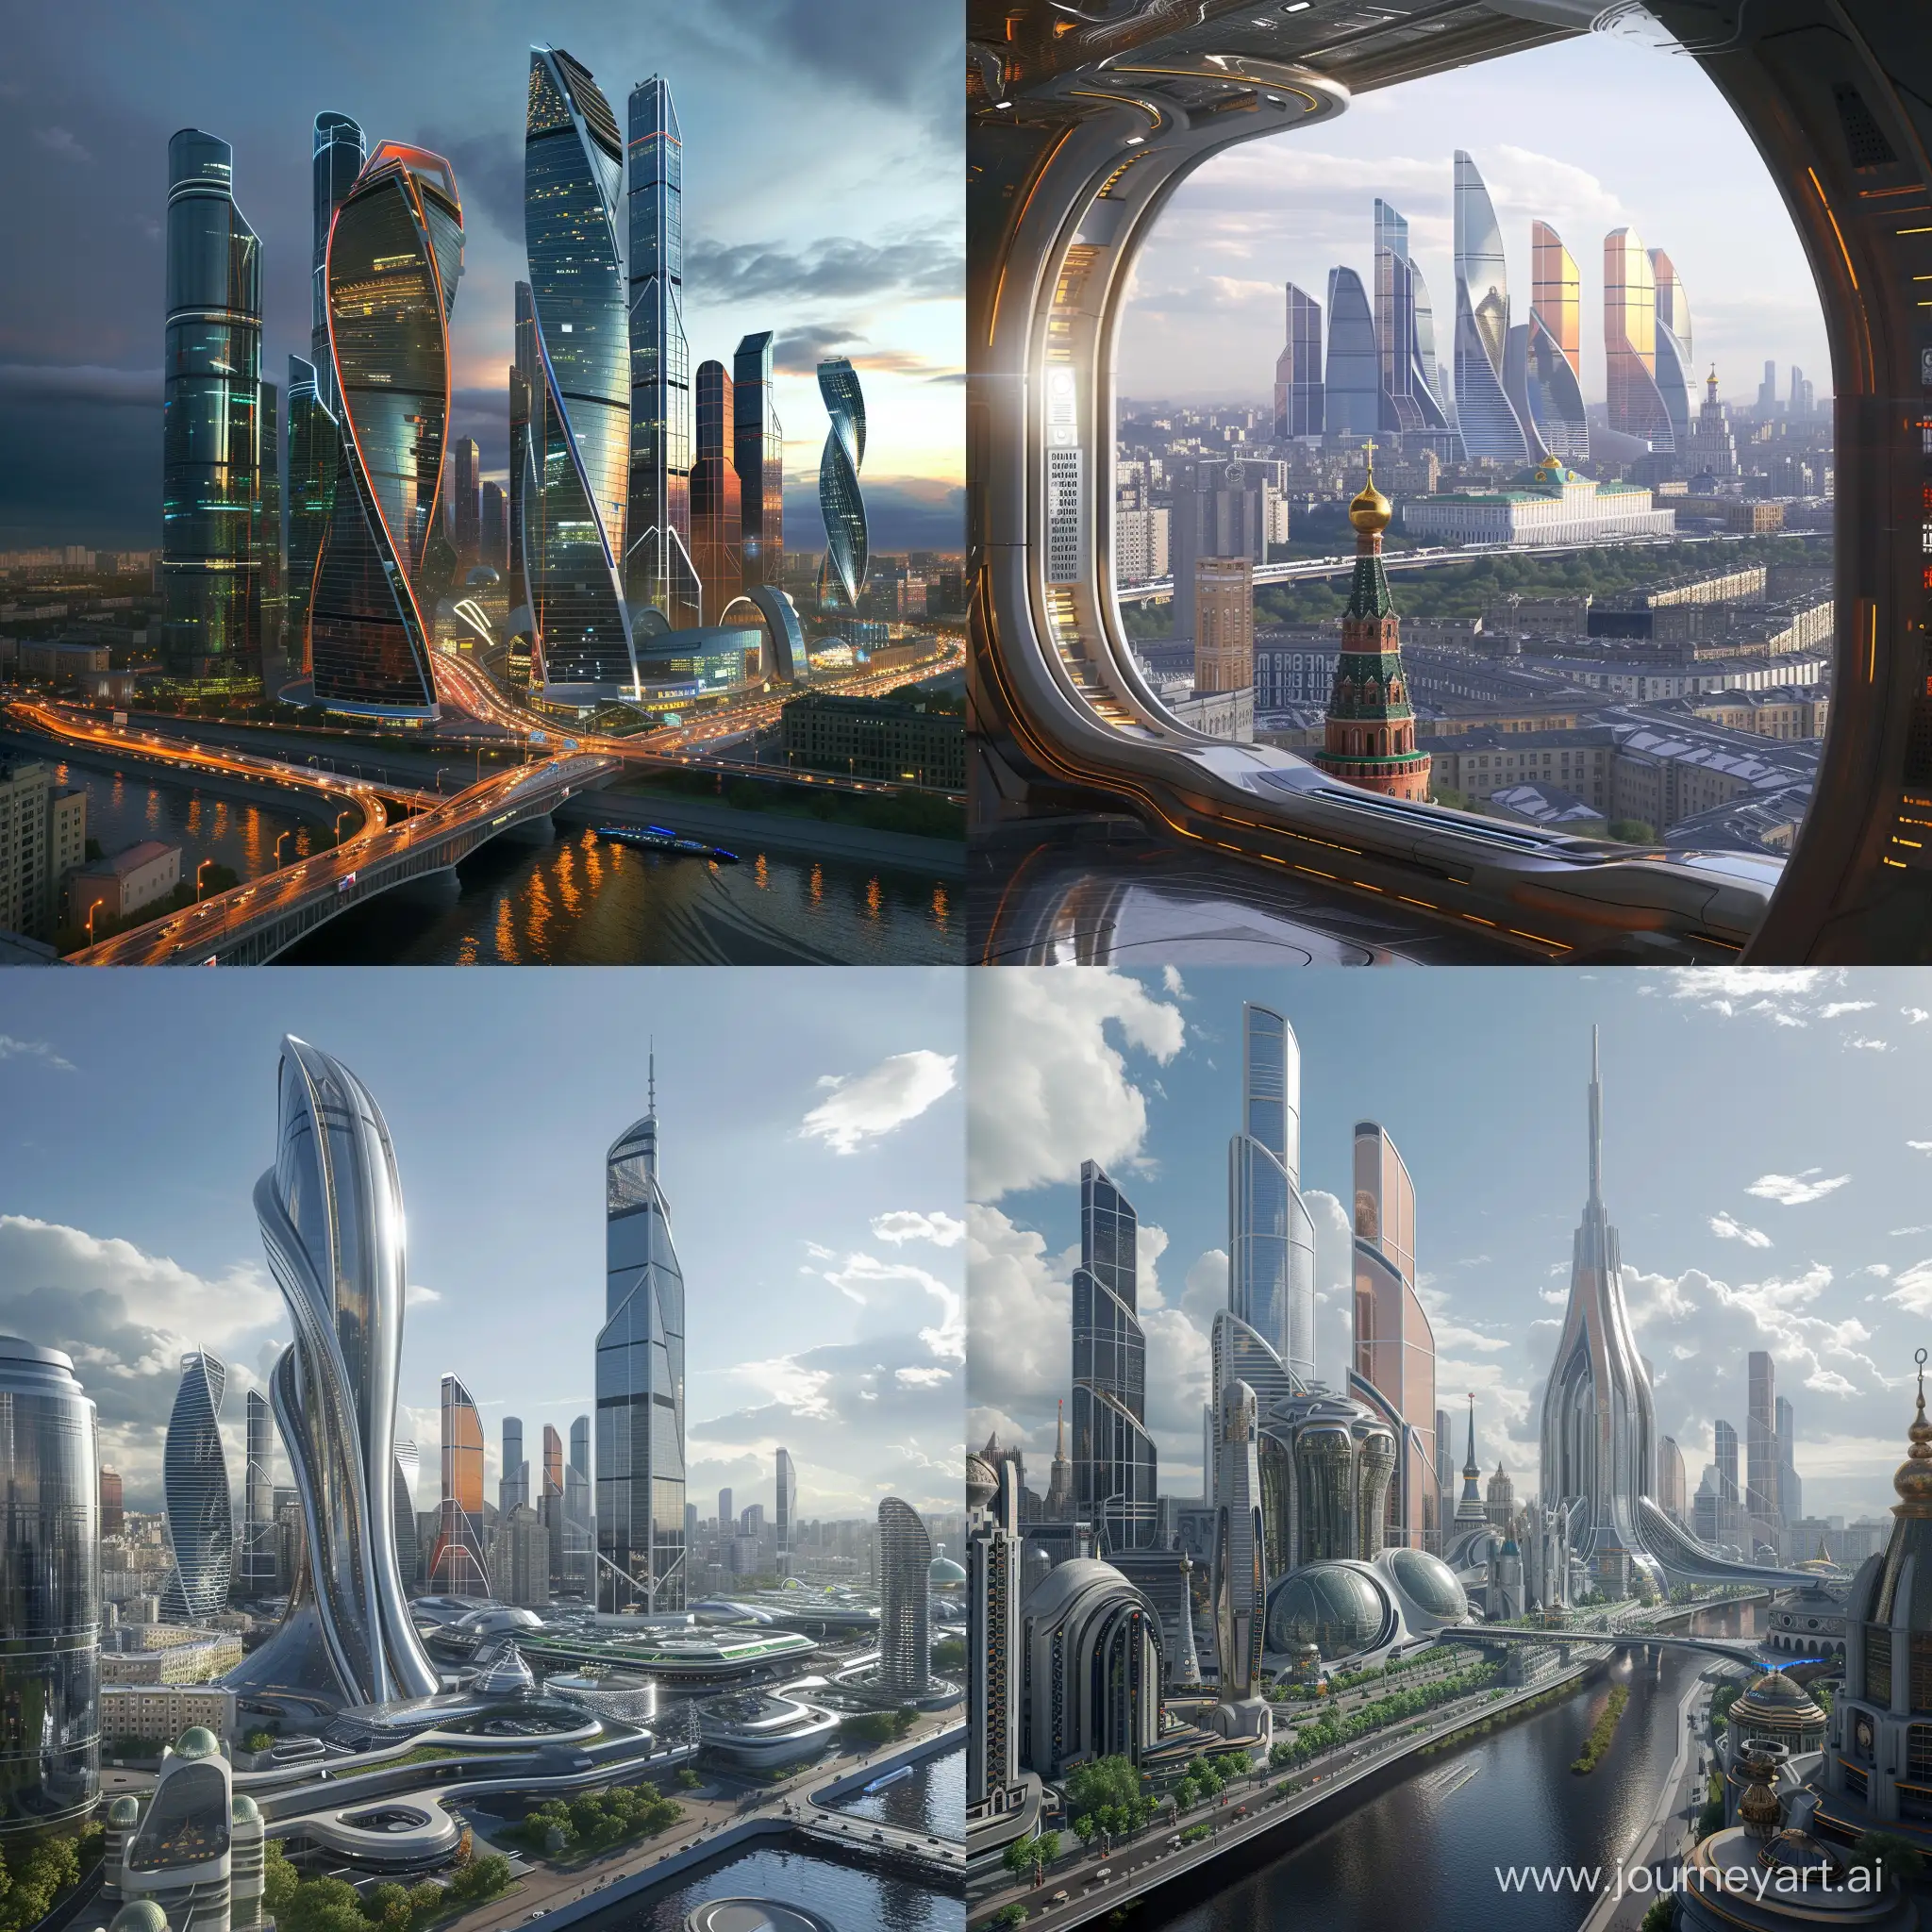 Futuristic-Moscow-Cityscape-HighTech-and-HighOctane-Visuals